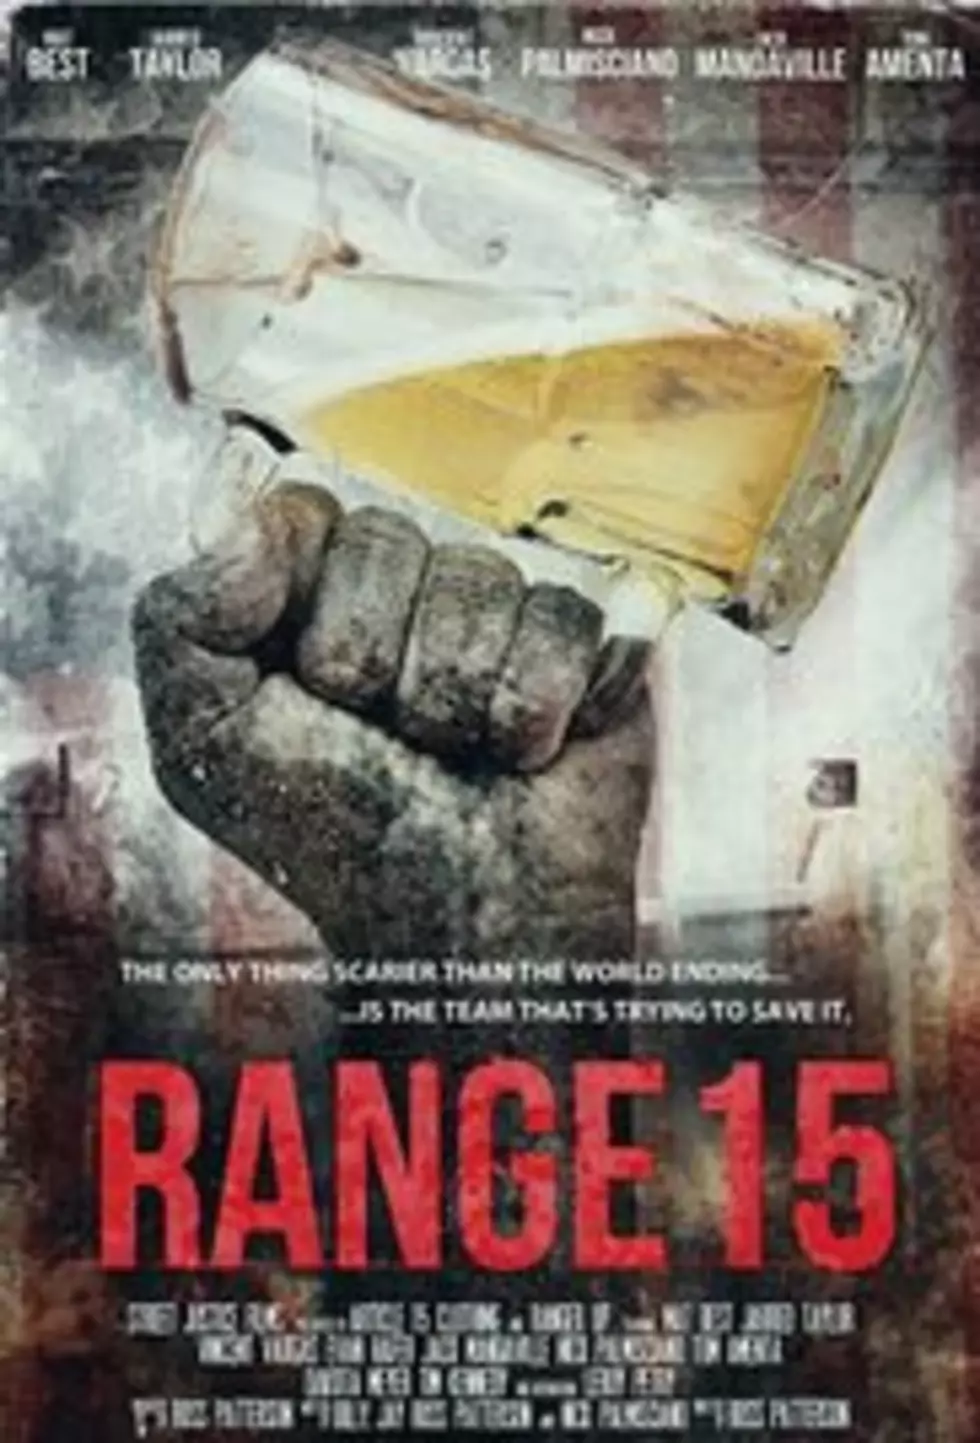 Celebrate National ‘Range 15′ Day With ‘Bitch I Operate’ and ‘Be My Woobie’